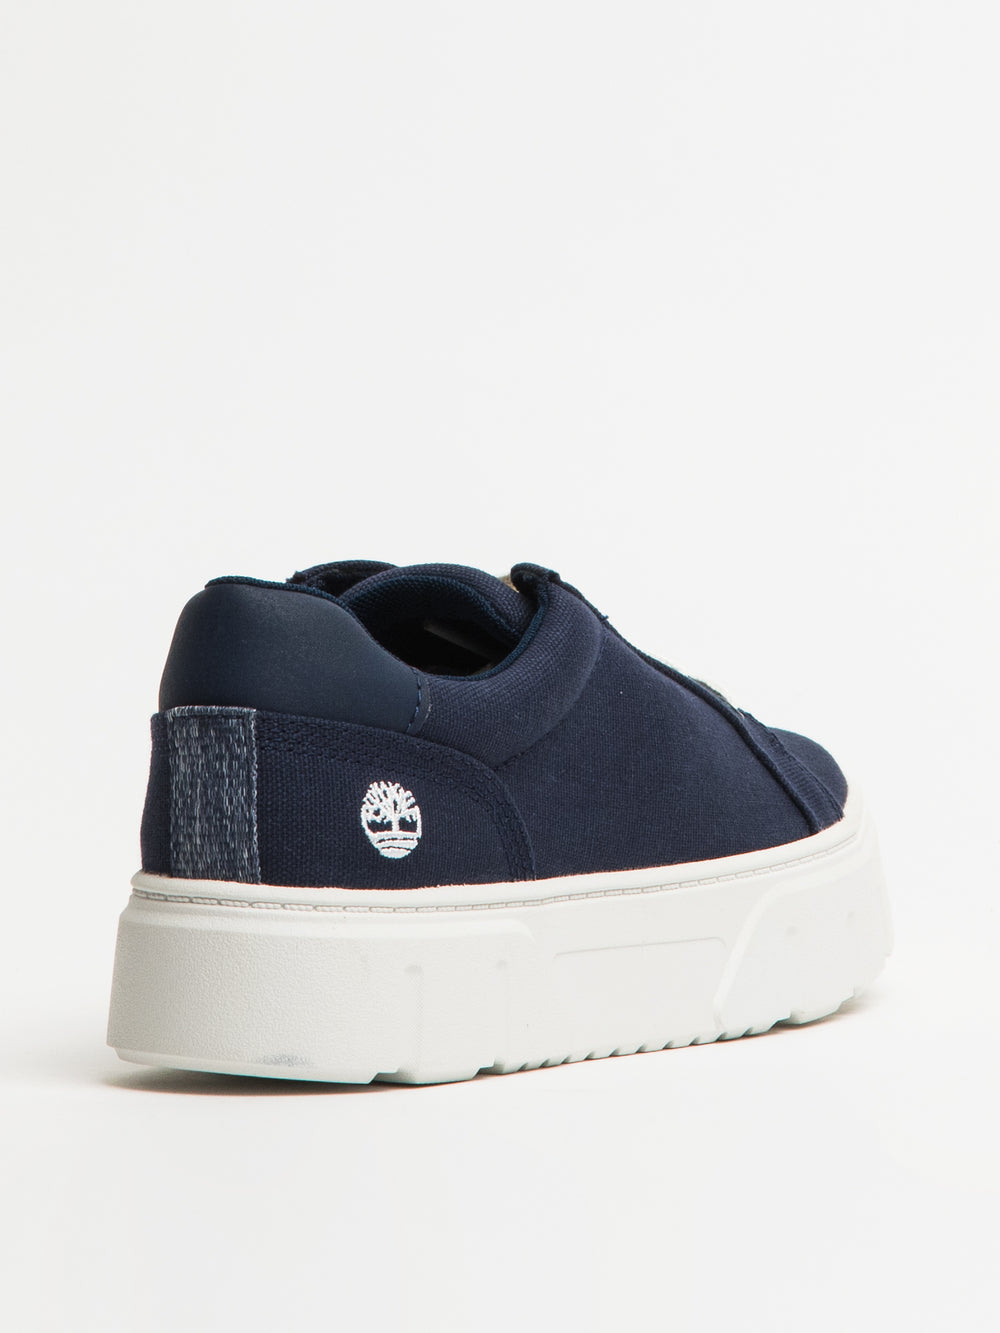 WOMENS TIMBERLAND LAUREL COURT CANVAS SNEAKERS